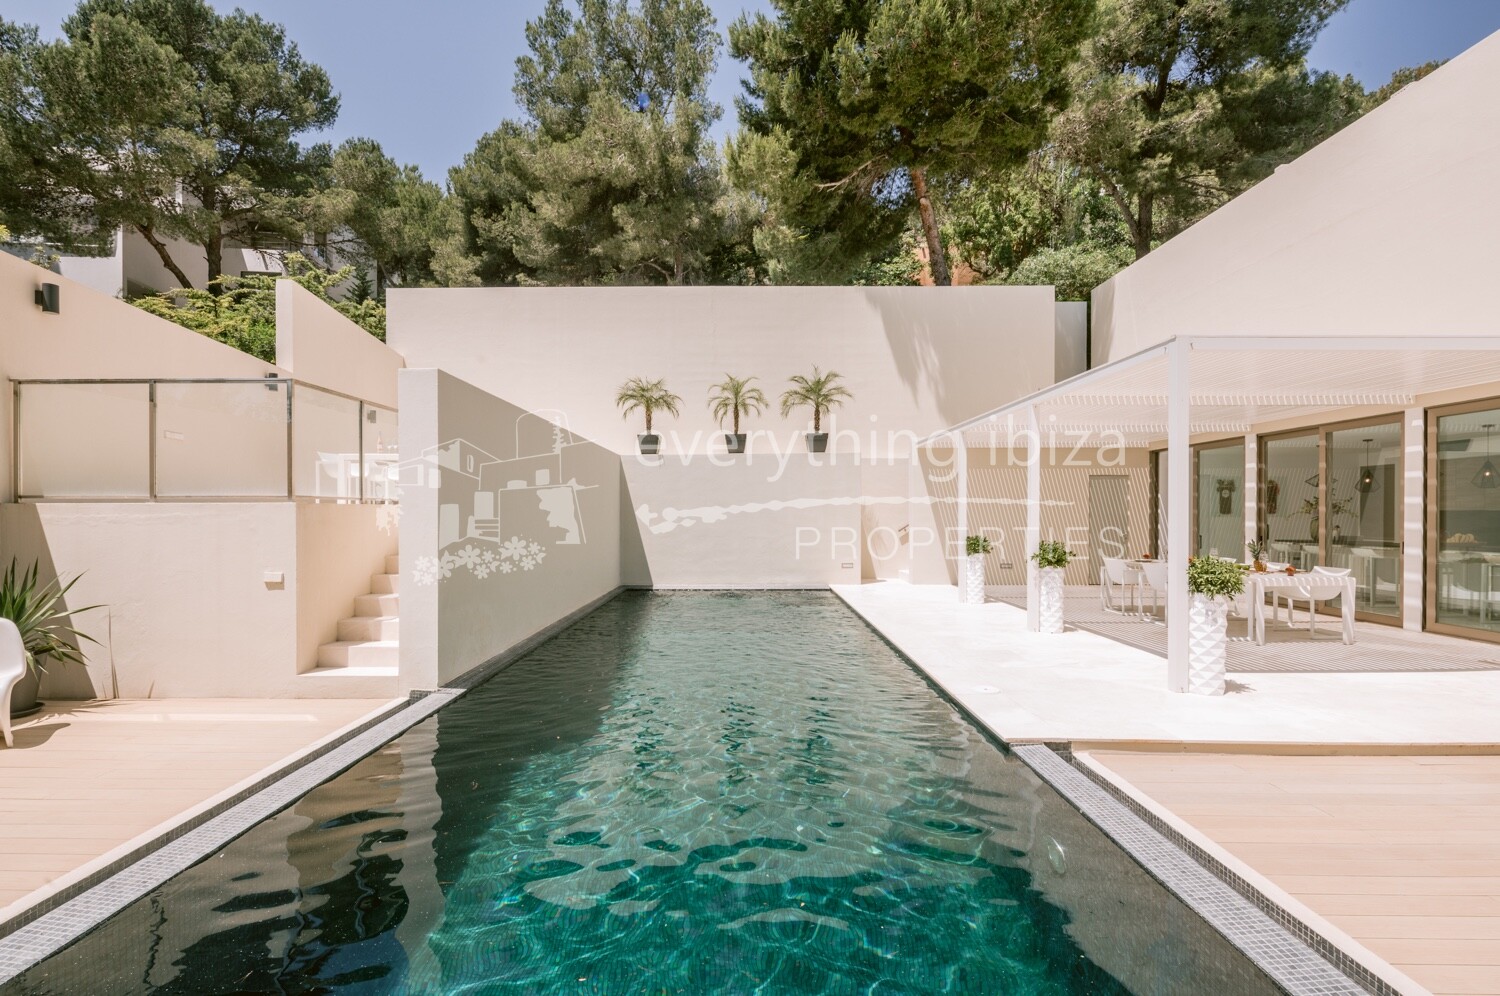 Stunning Cosmopolitan Villa Beautifully Designed & Styled, ref. 1463, for sale in Ibiza by everything ibiza Properties